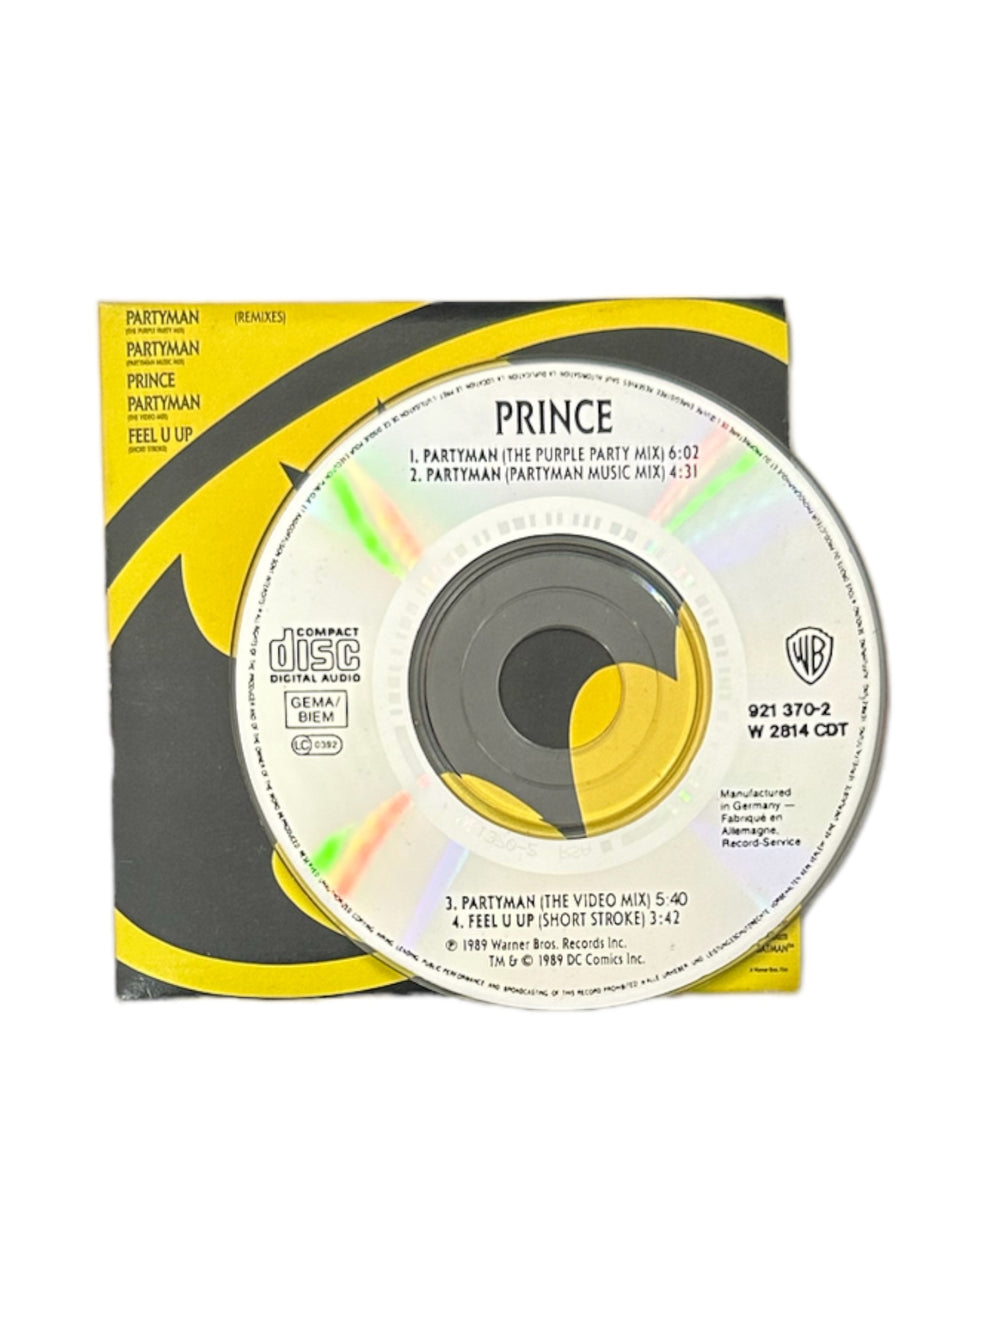 Prince – Partyman Feel U Up 3 Inch CD Single Very Rare 4 Track Release